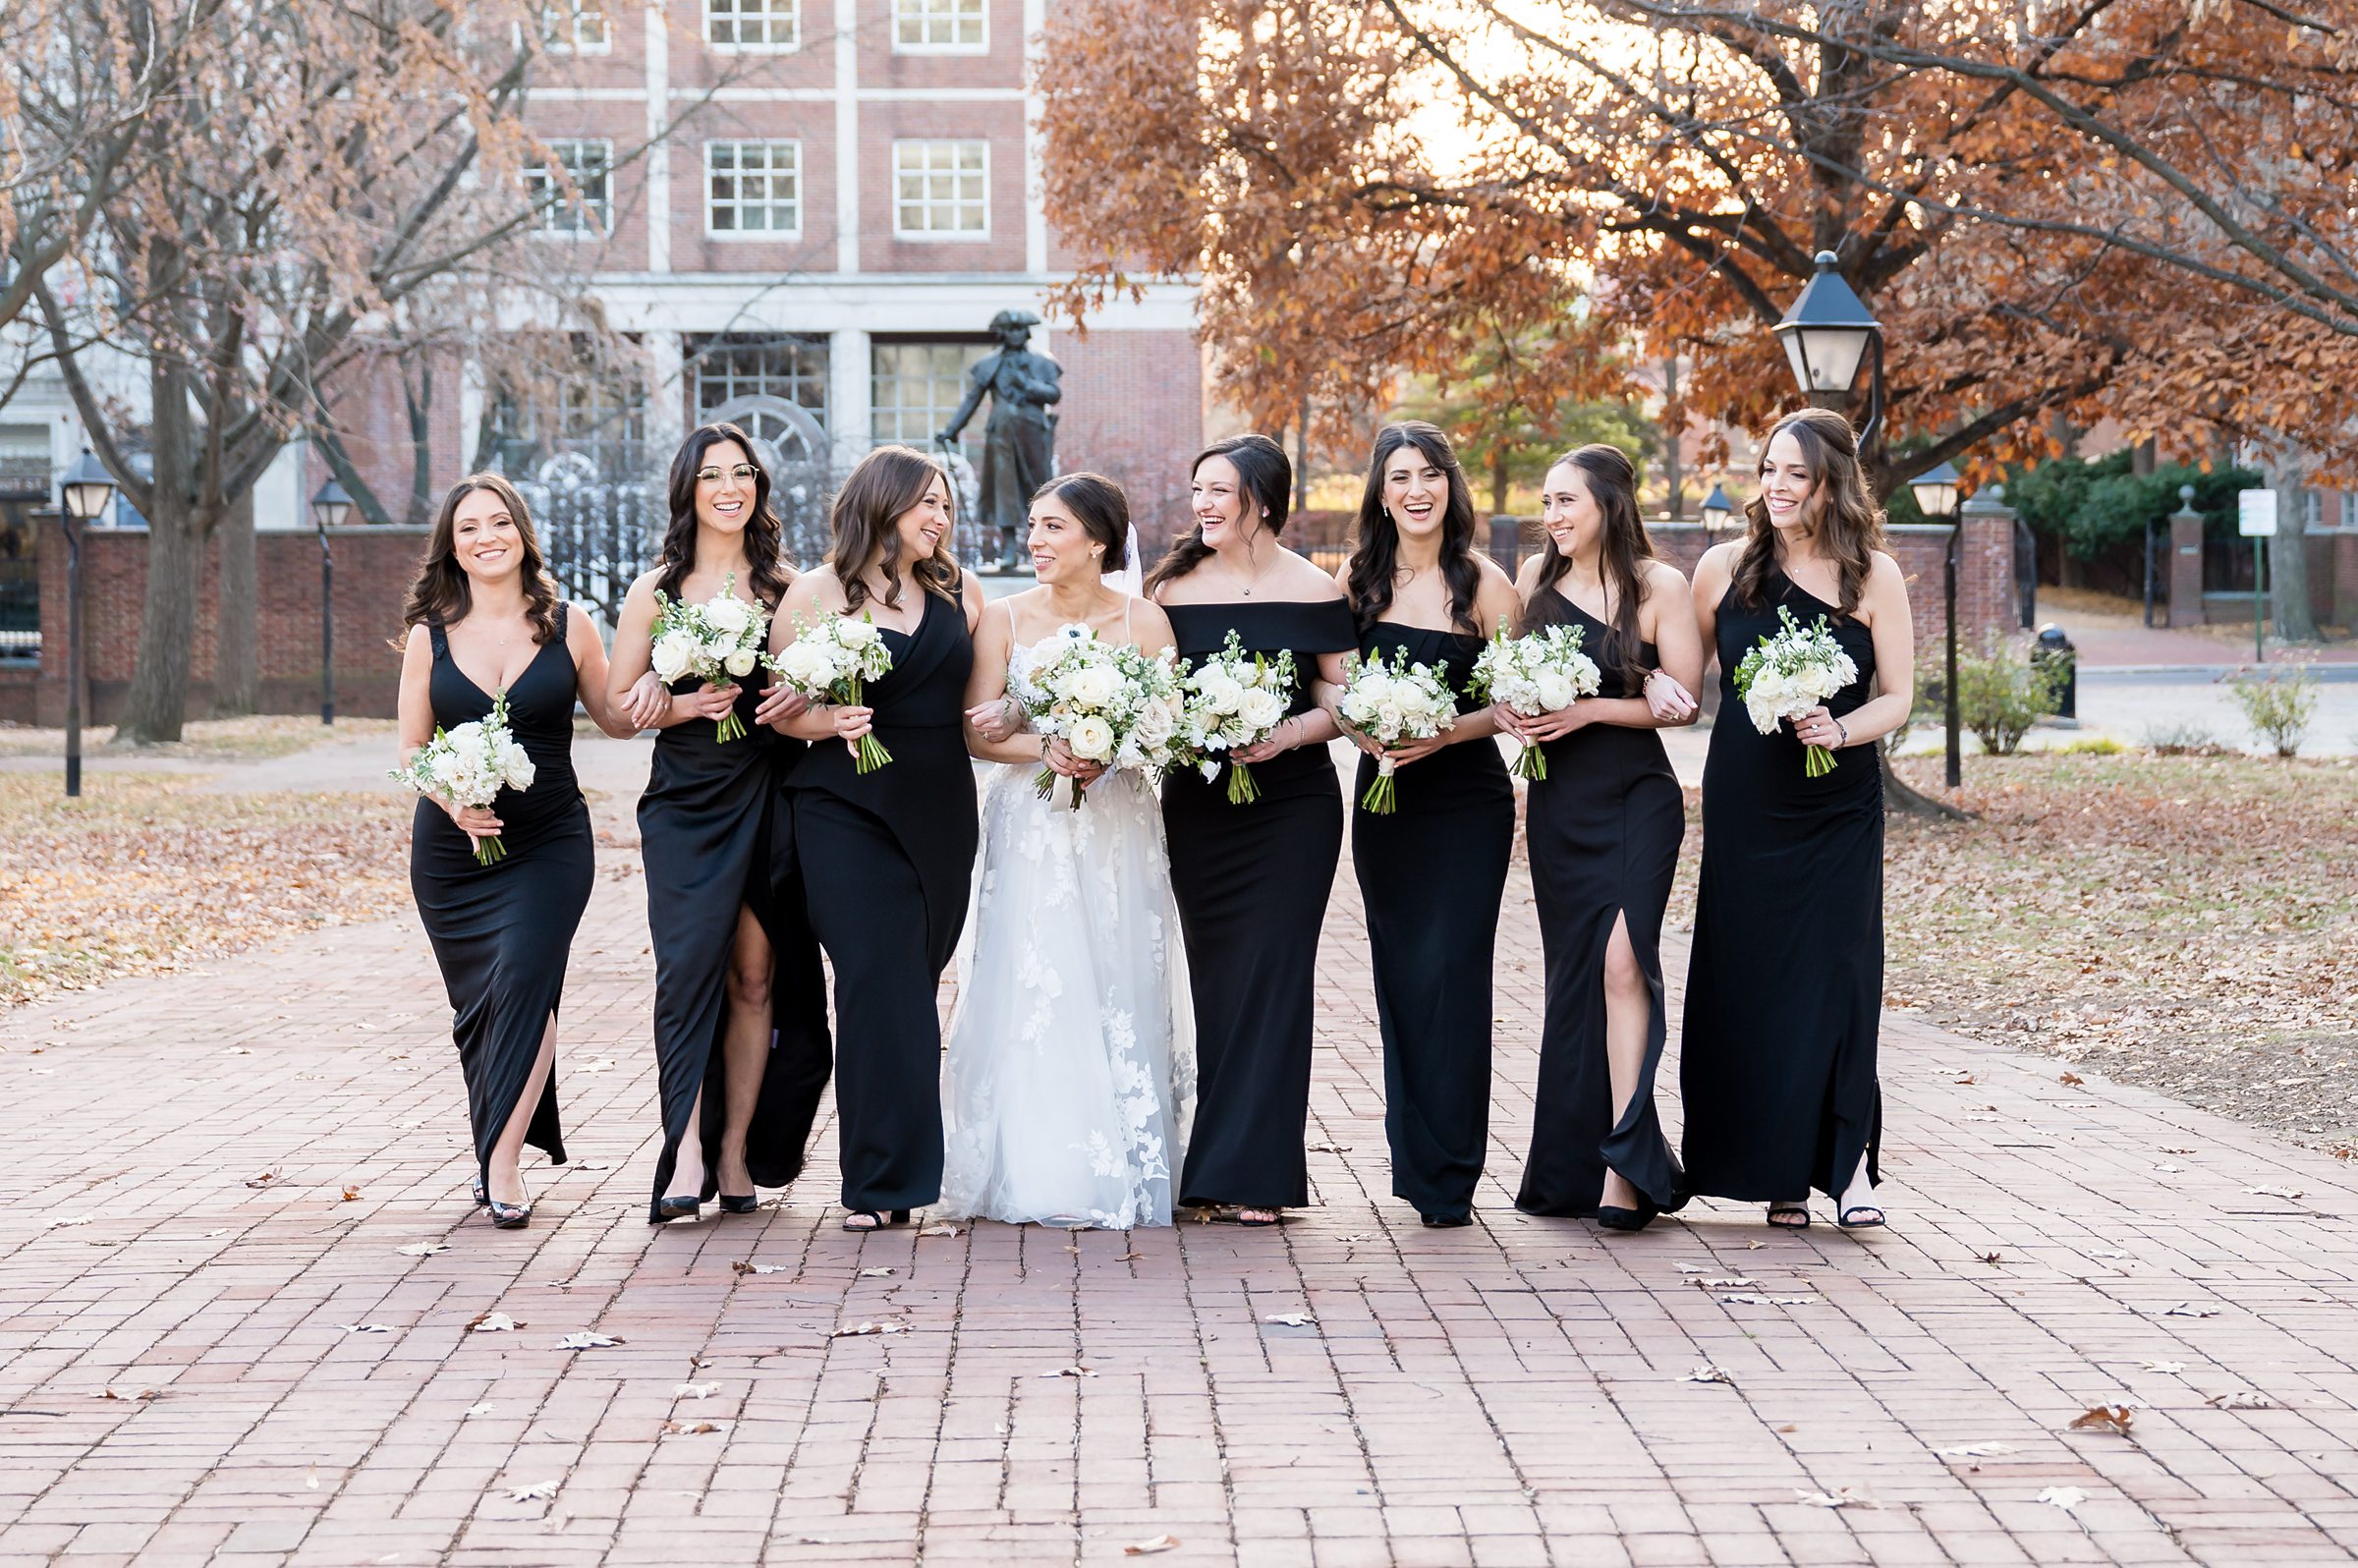 A bride and her bridesmaids in elegant black dresses pose on a brick walkway during a Lilah Events wedding.